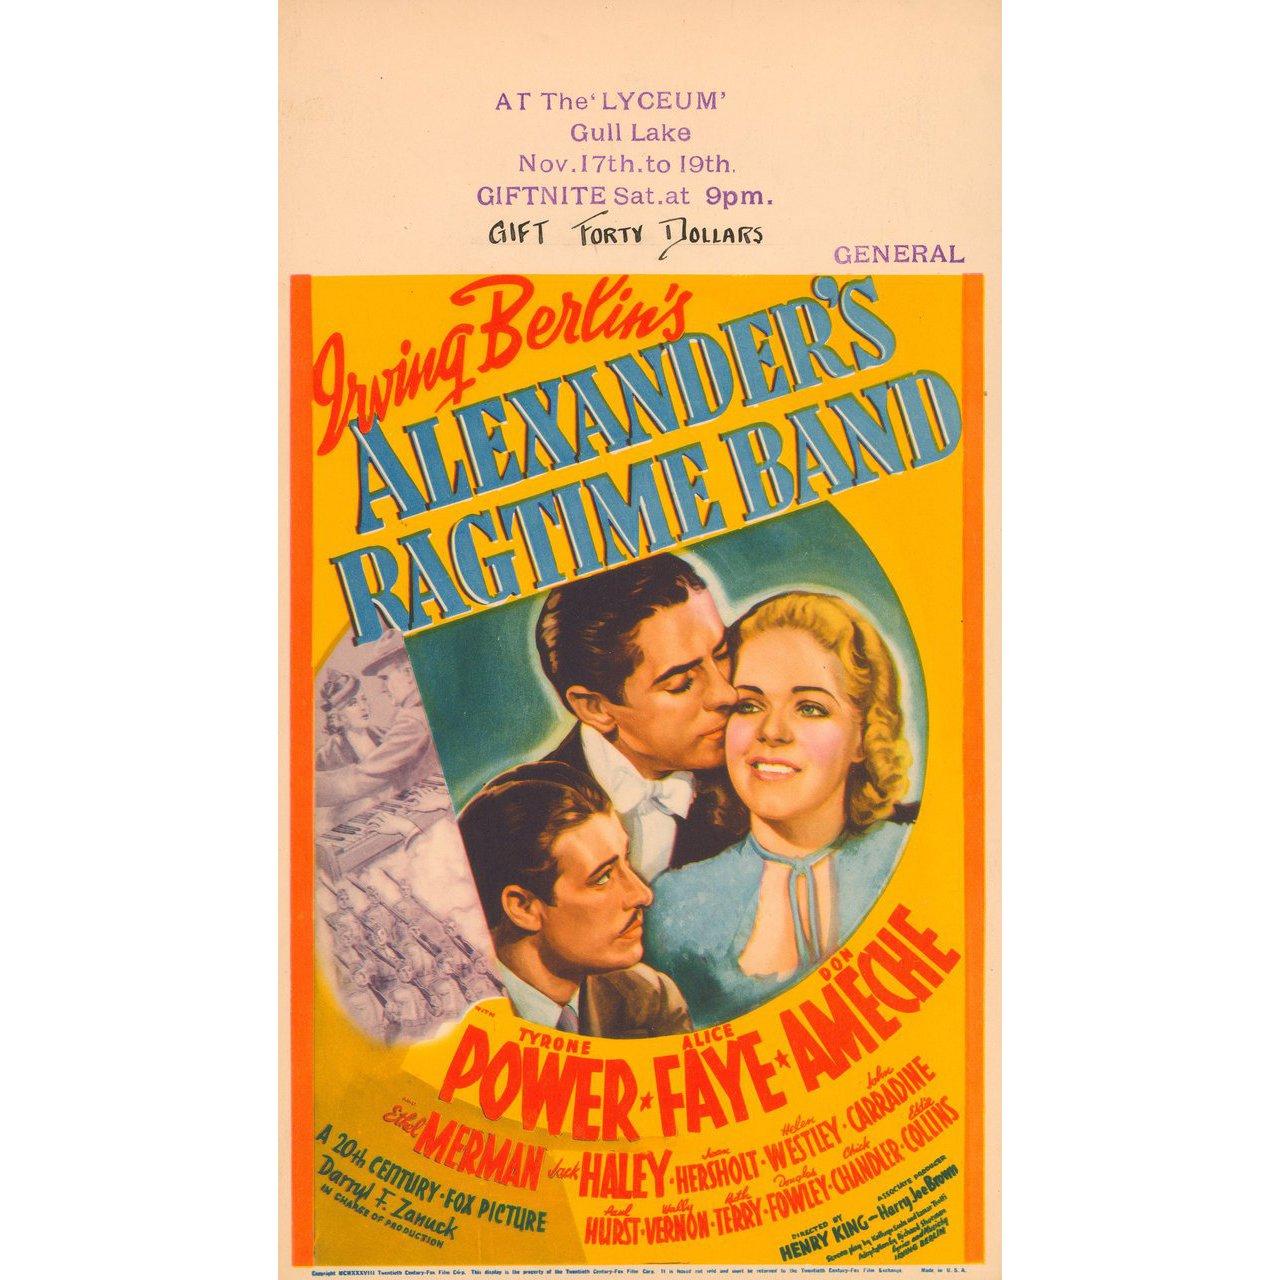 Original 1938 U.S. mini window card poster for the film Alexander's Ragtime Band directed by Henry King with Tyrone Power / Alice Faye / Don Ameche / Ethel Merman. Fine condition, rolled. Please note: the size is stated in inches and the actual size